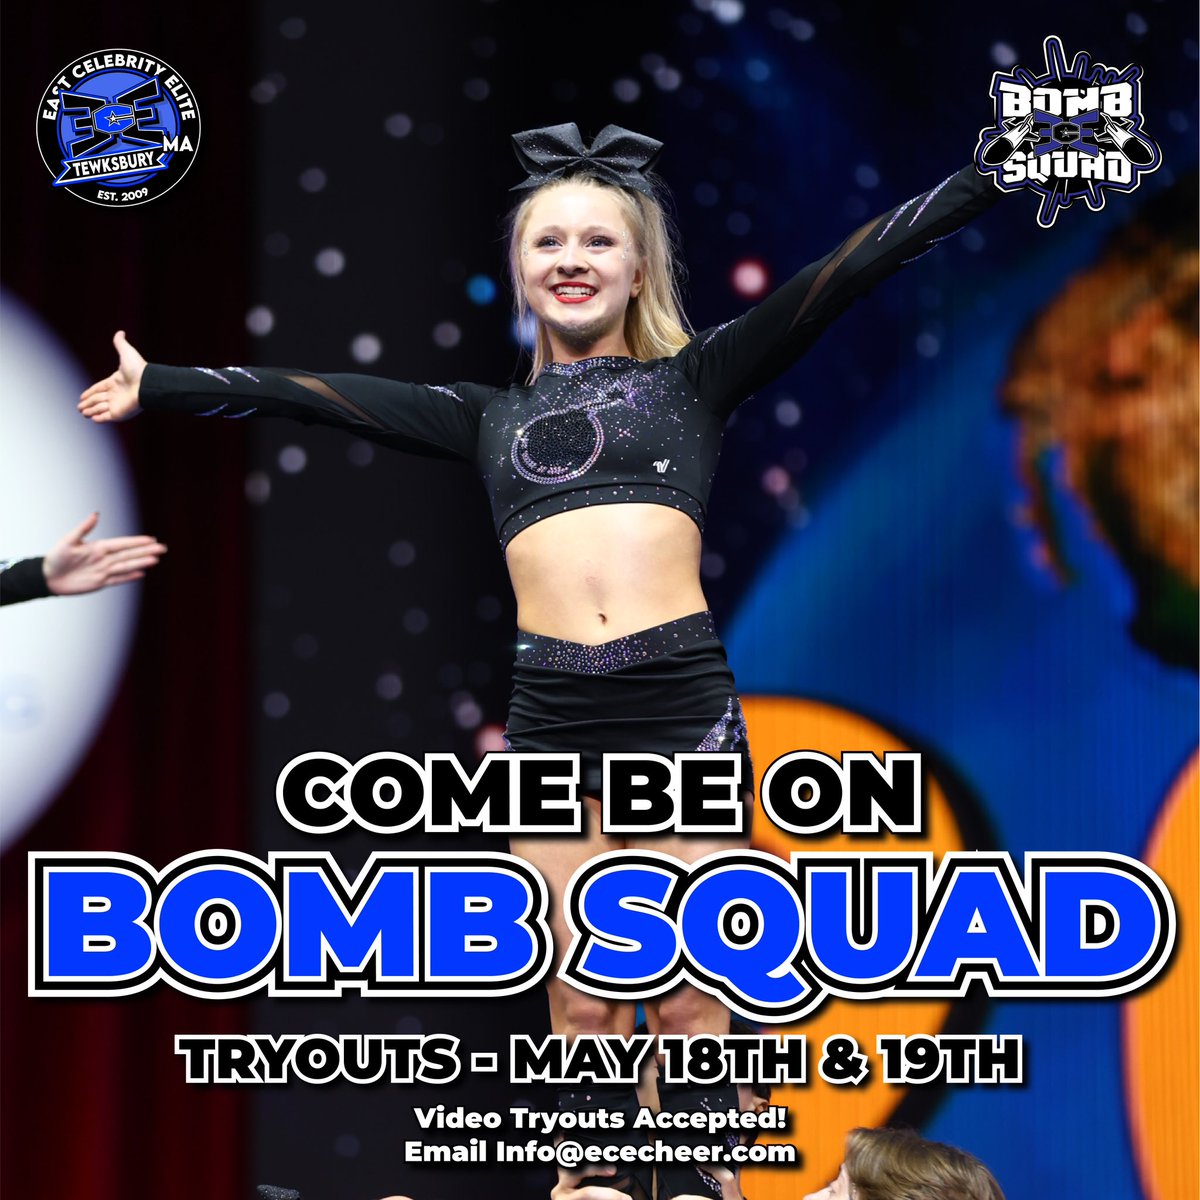 COME BE ON 𝘽𝙊𝙈𝘽 𝙎𝙌𝙐𝘼𝘿 💣💪 Tryouts in Tewksbury are coming up next week! 💙🖤 ®️Register 👉 ECEtewksbury.com/tryouts